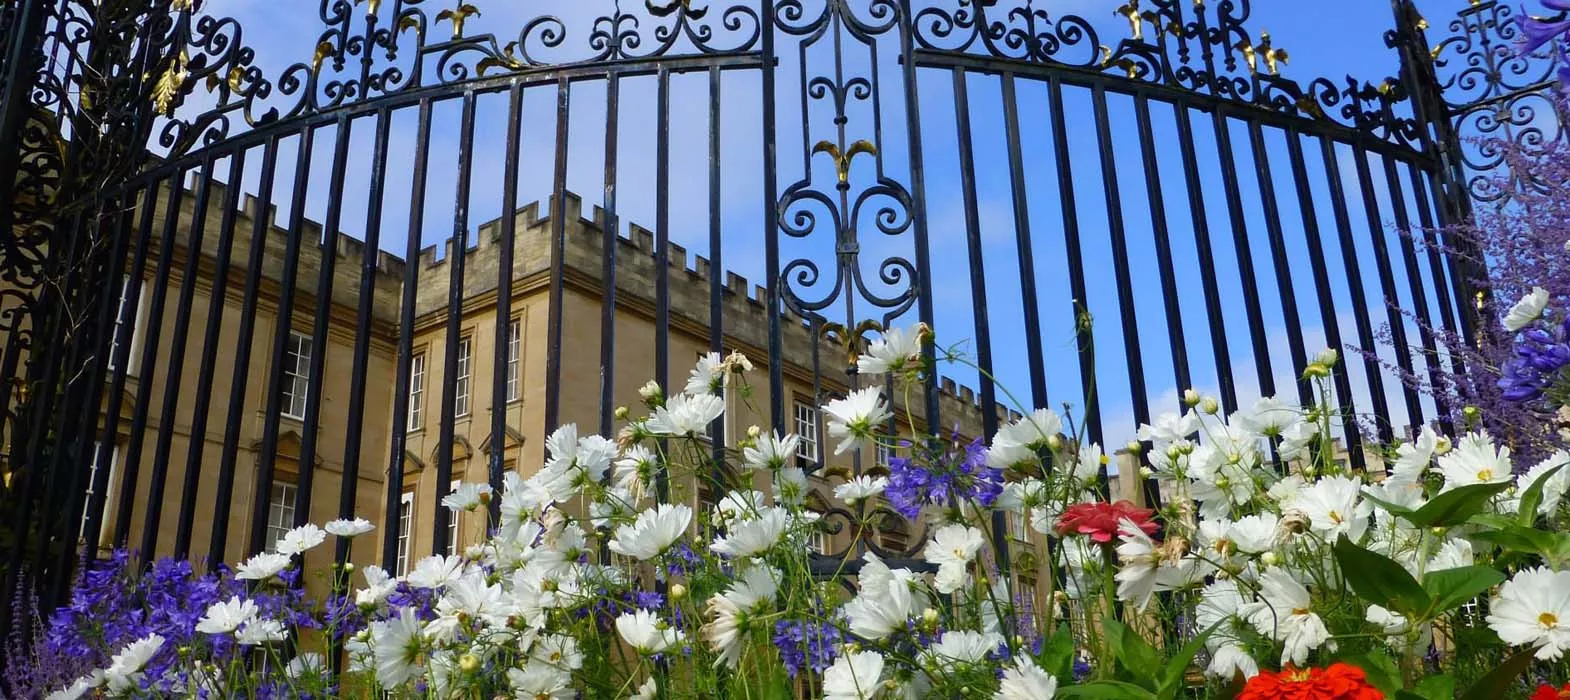 Summer flowers and the Gates